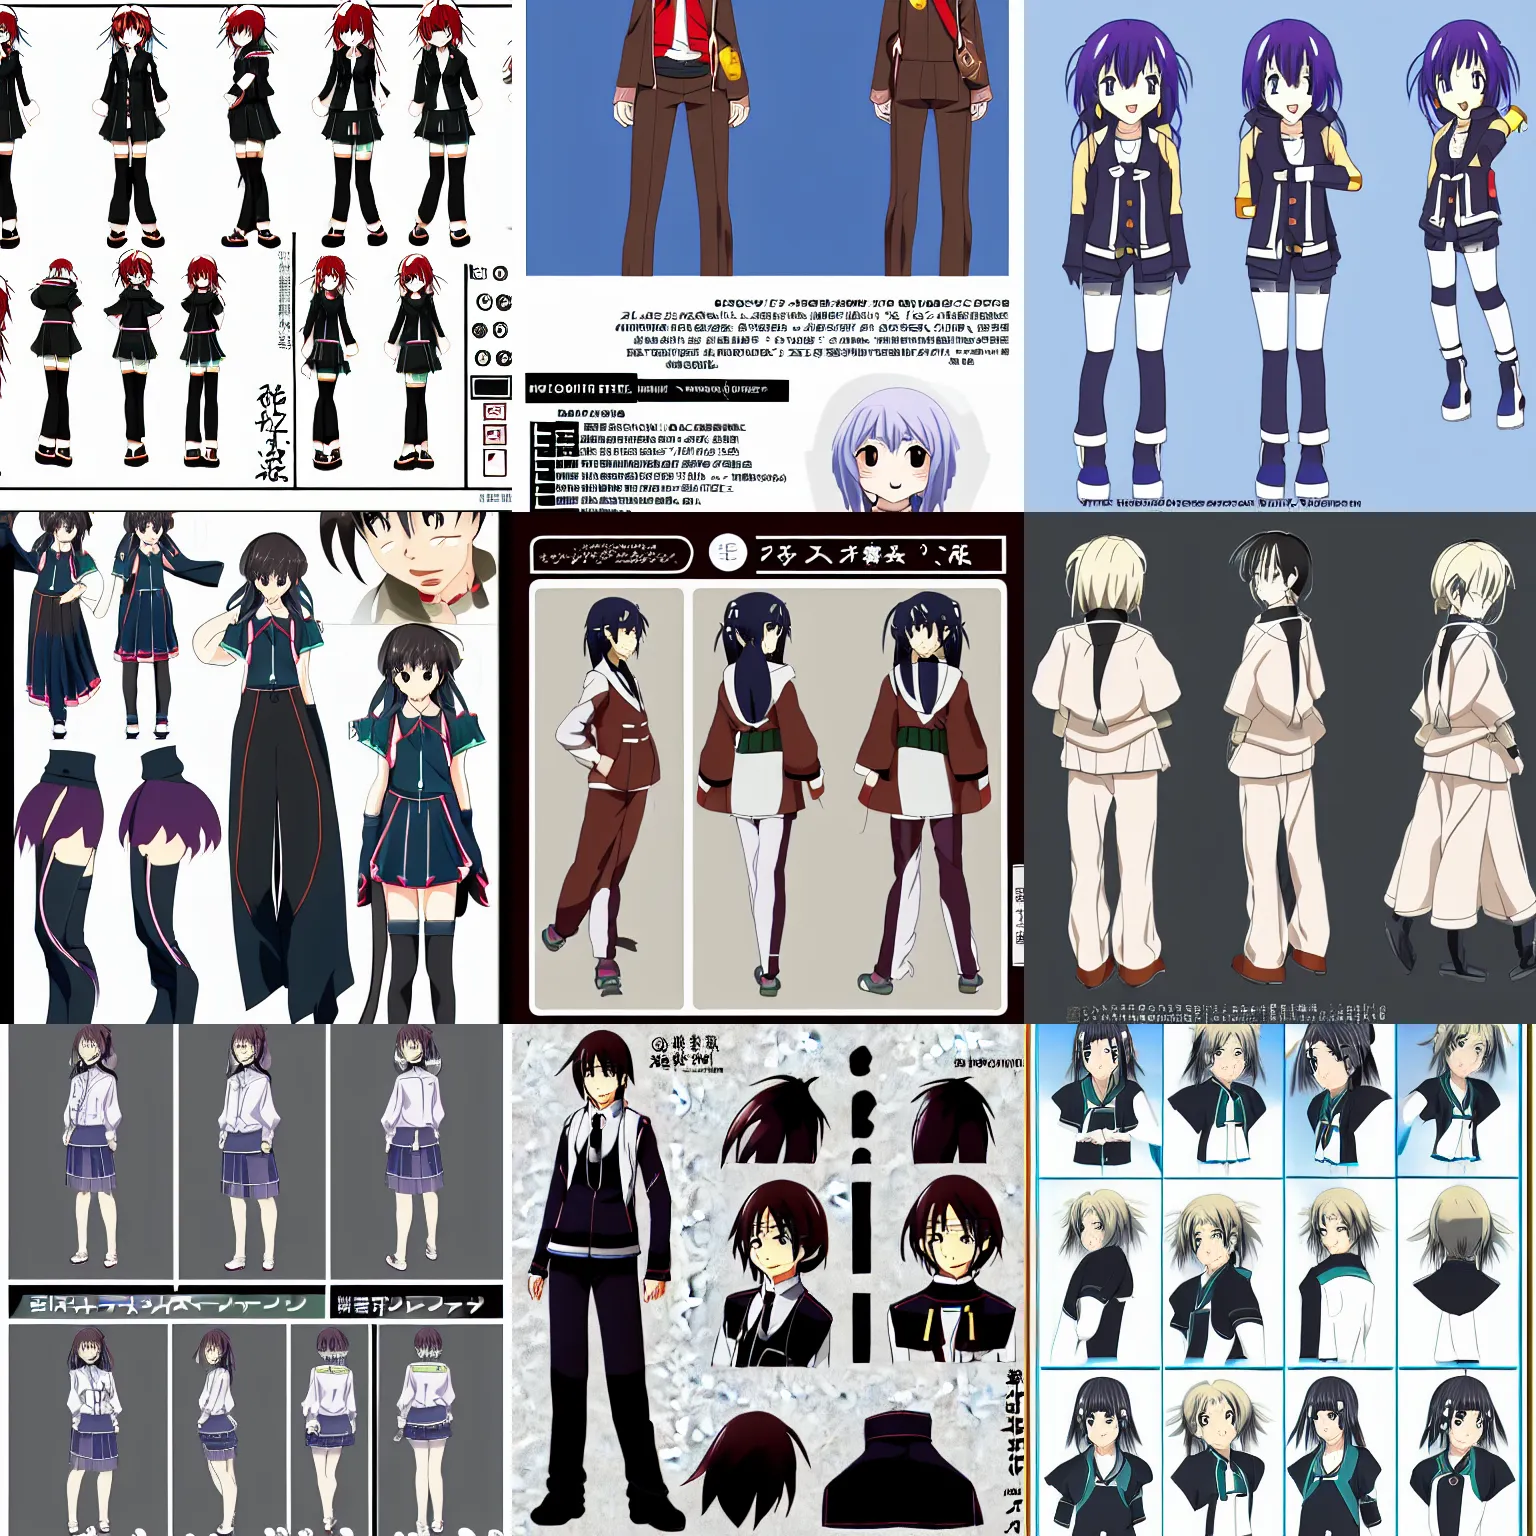 anime reference sheets/ character settei — Vocaloid IA